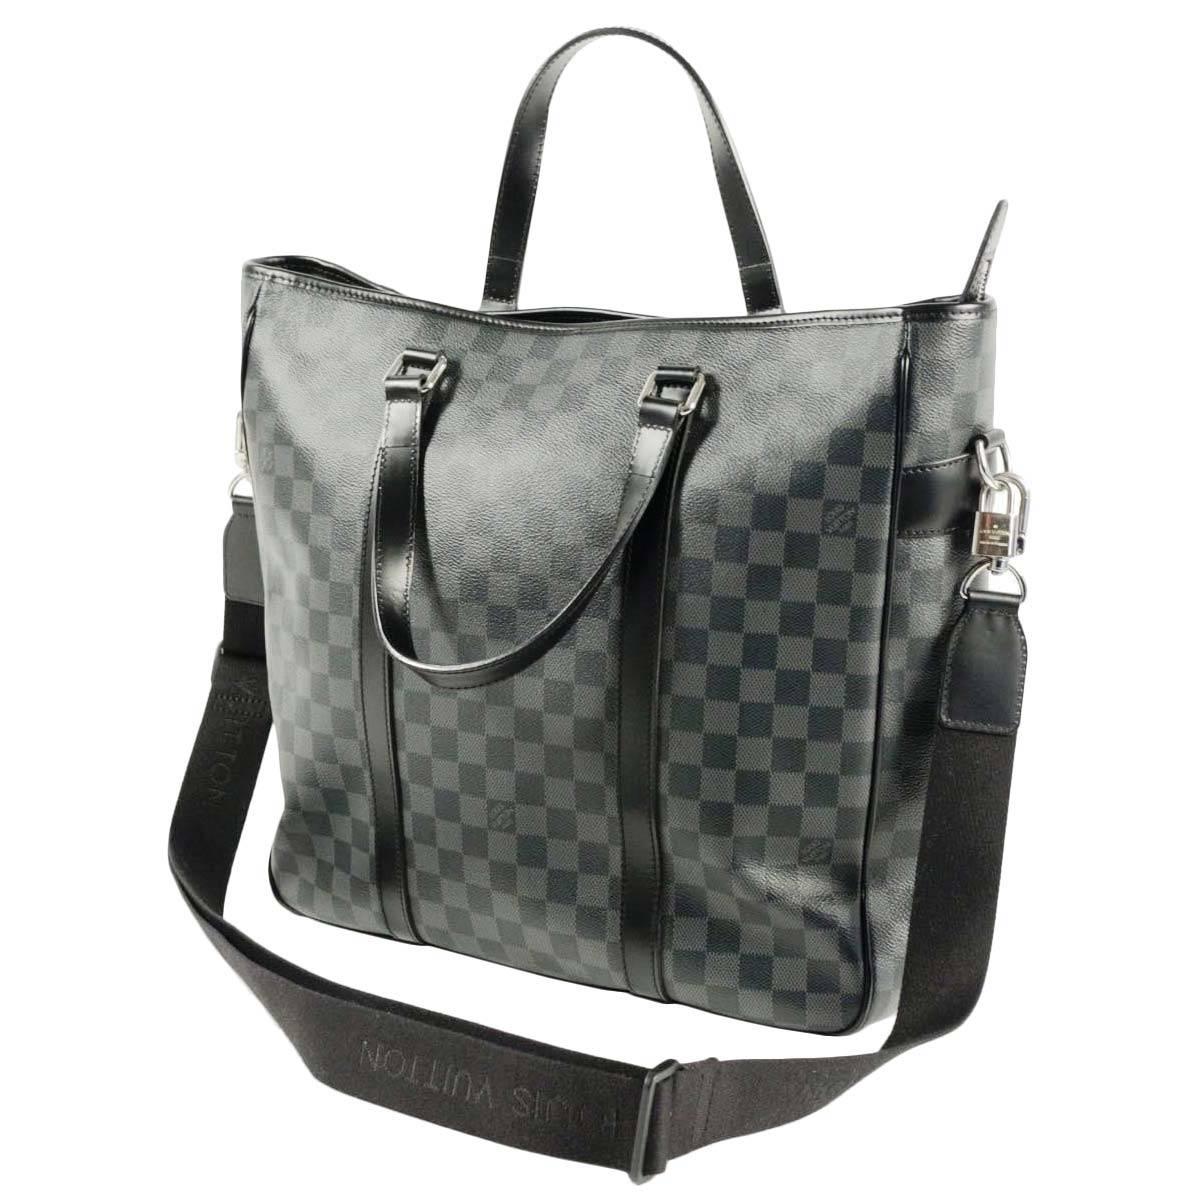 Pre-Owned Tadao Bag by Louis Vuitton, Grey and Black